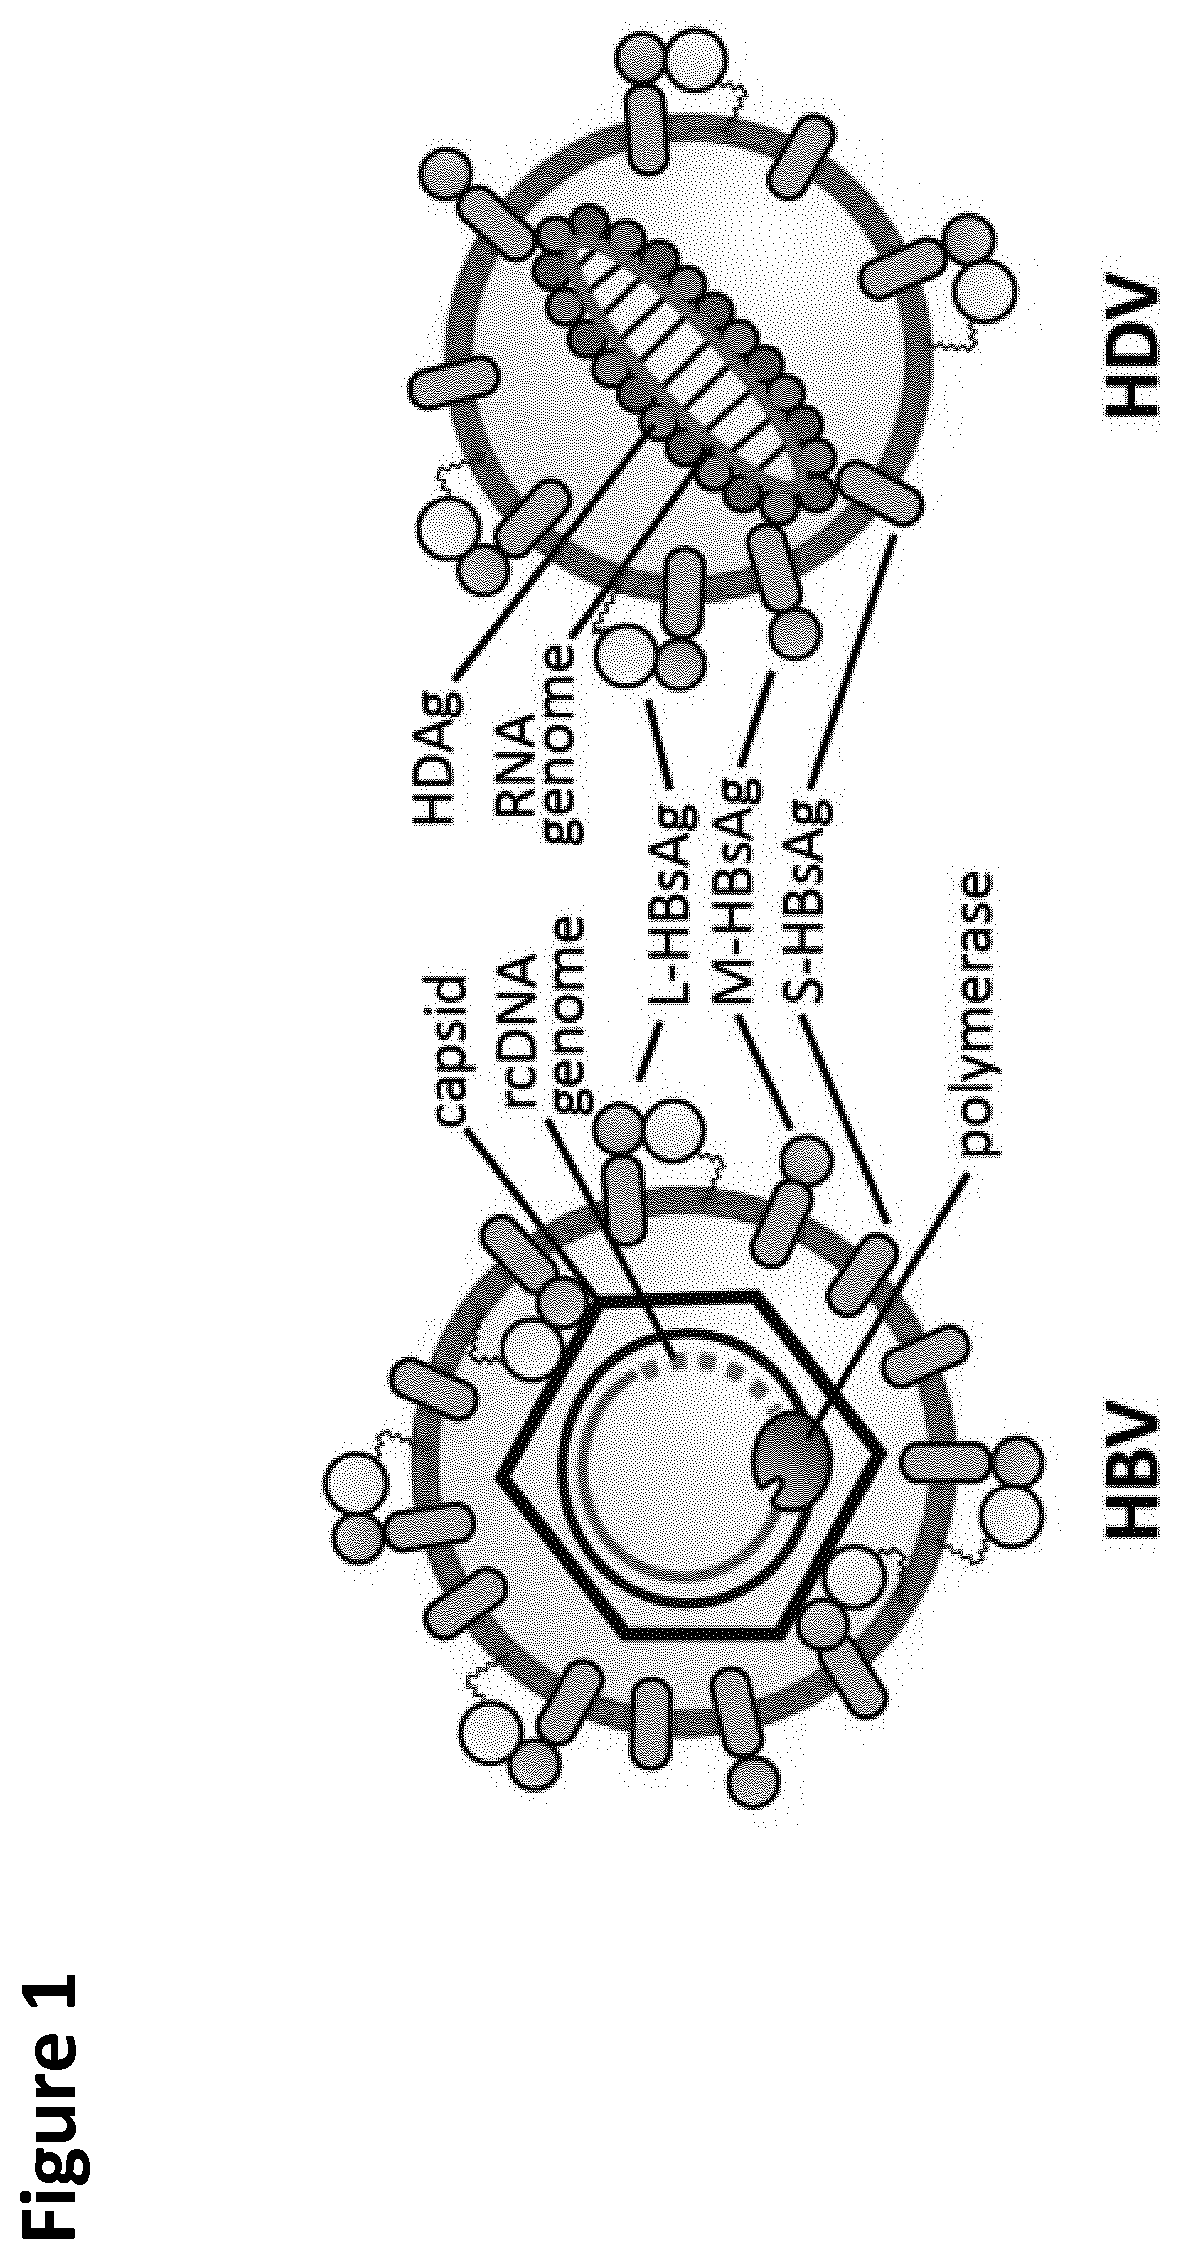 Method and means for the rapid detection of hdv infections